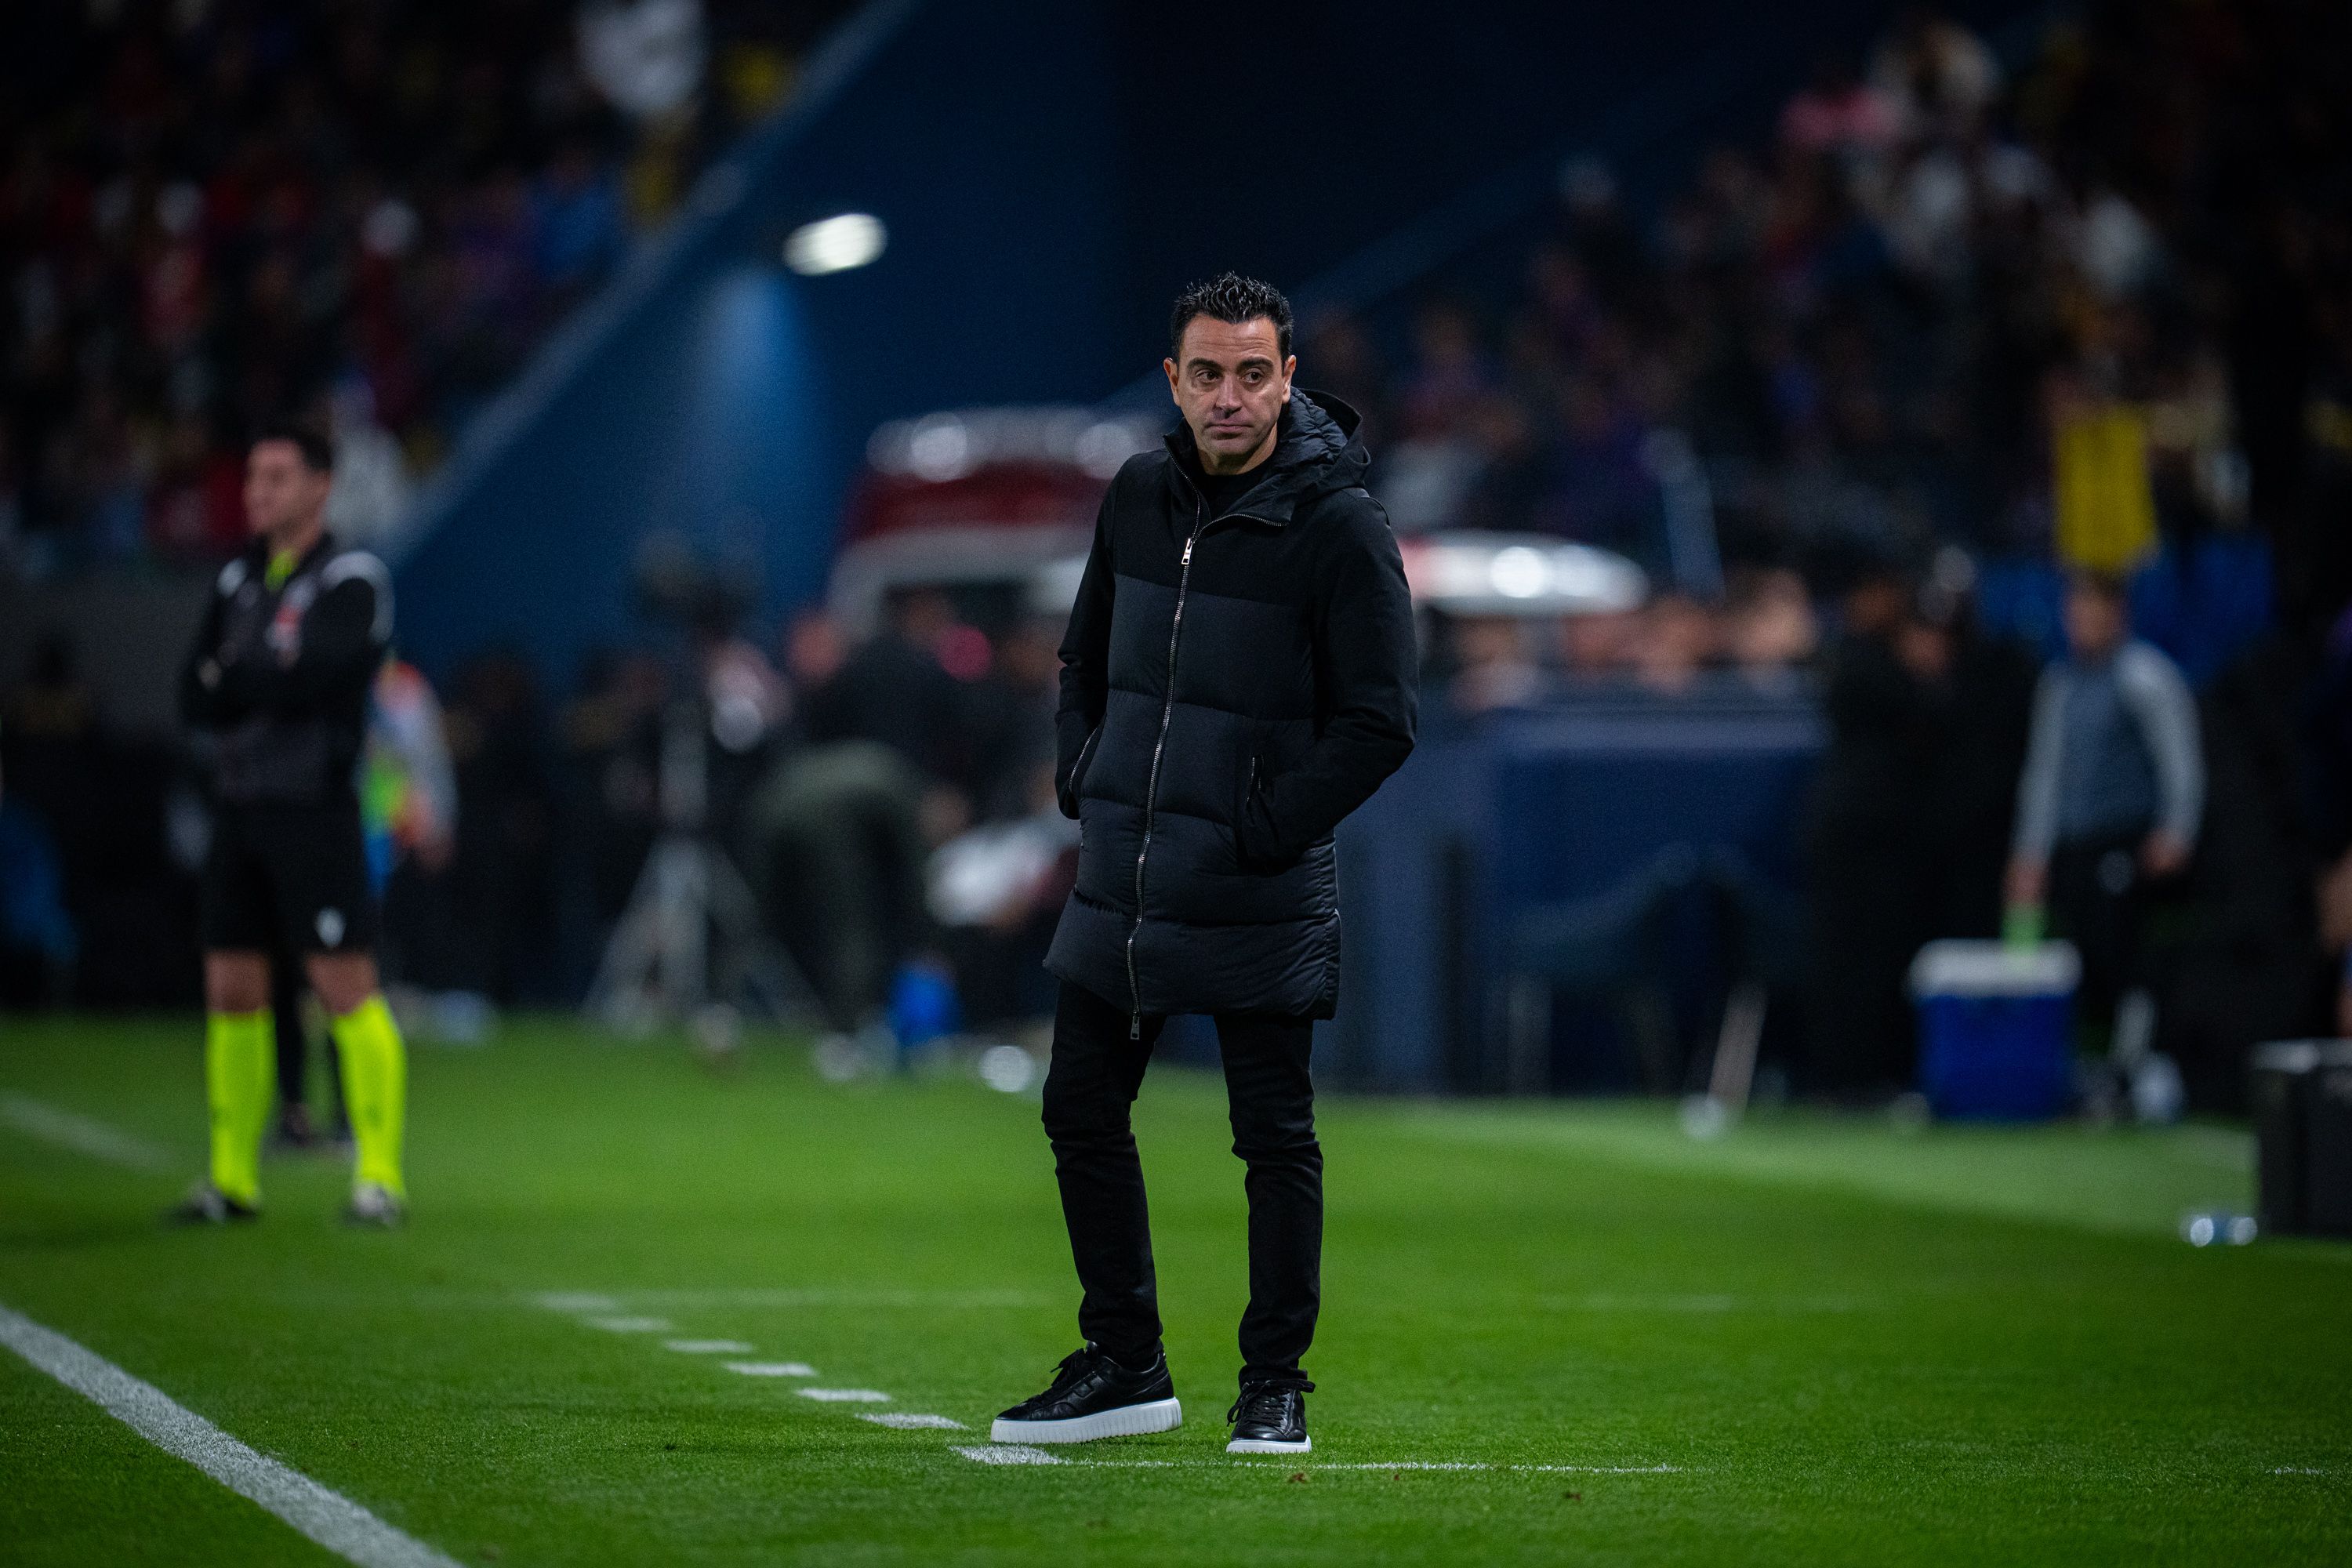 Exclusive: Emmanuel Petit questions Xavi’s criticism of Barcelona media – “He knows the reality”